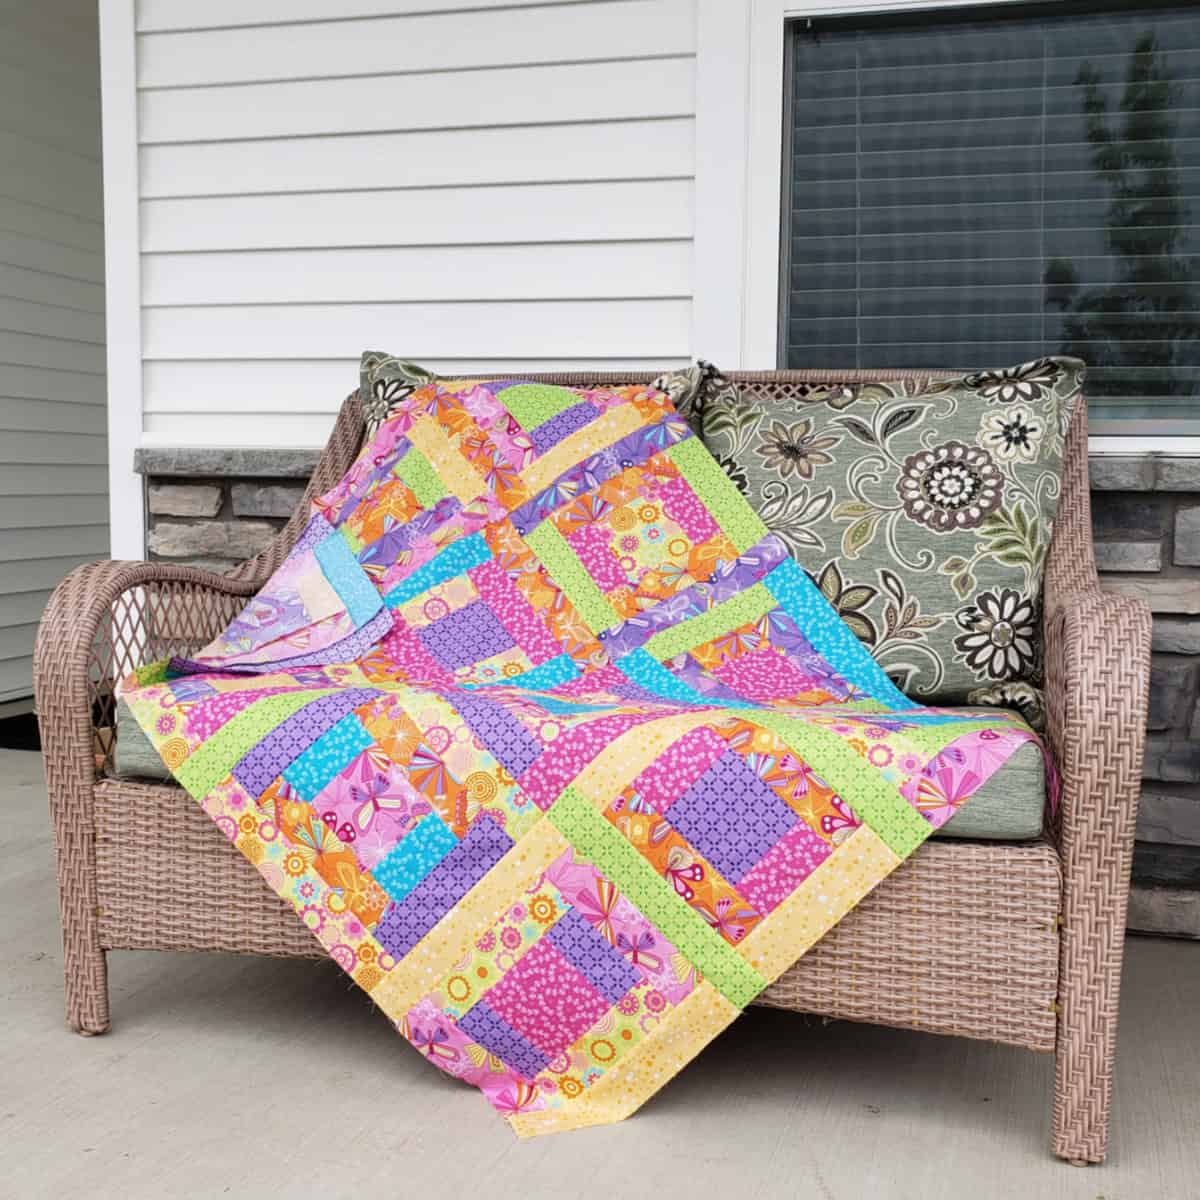 River Squares baby quilt on front porch